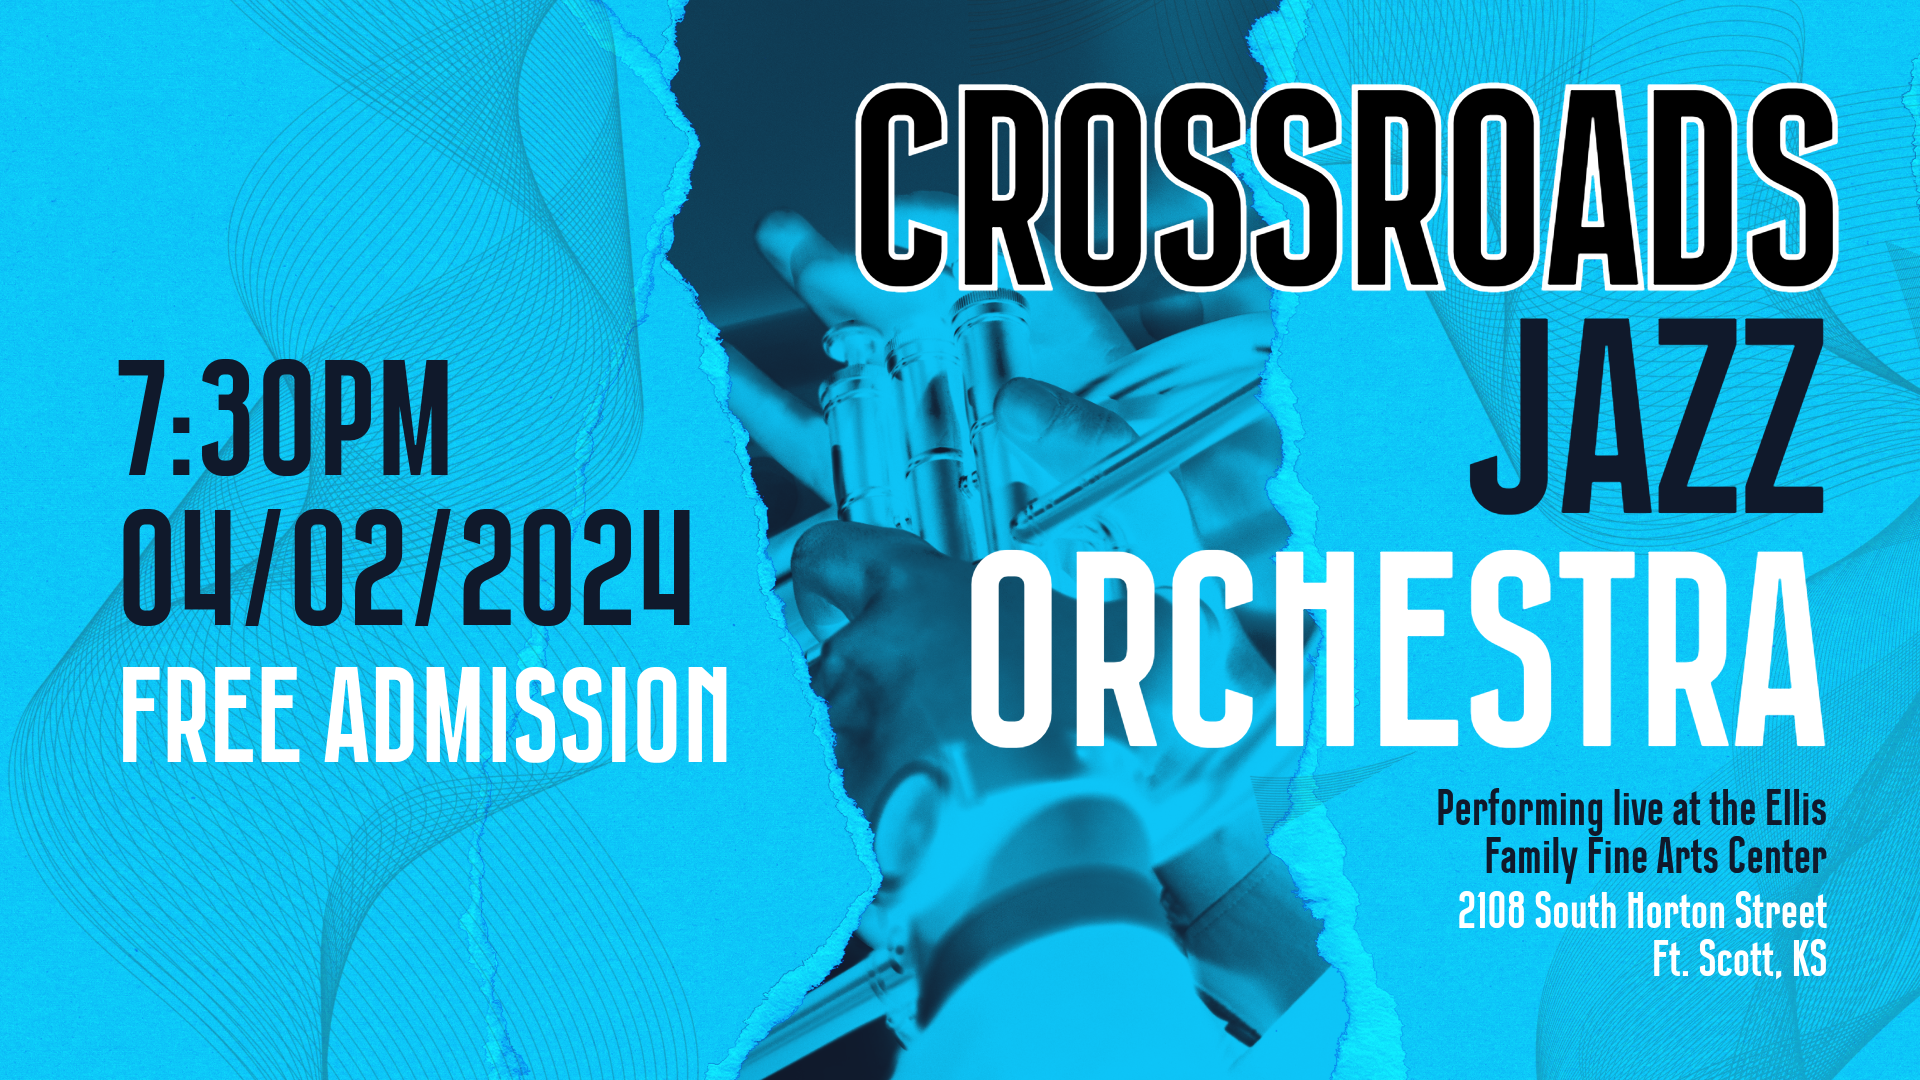 CROSSROADS JAZZ ORCHESTRA. 7:30 PM, 4/2/2124. Free Admission. Performing live at the Ellis Family Fine Arts Center